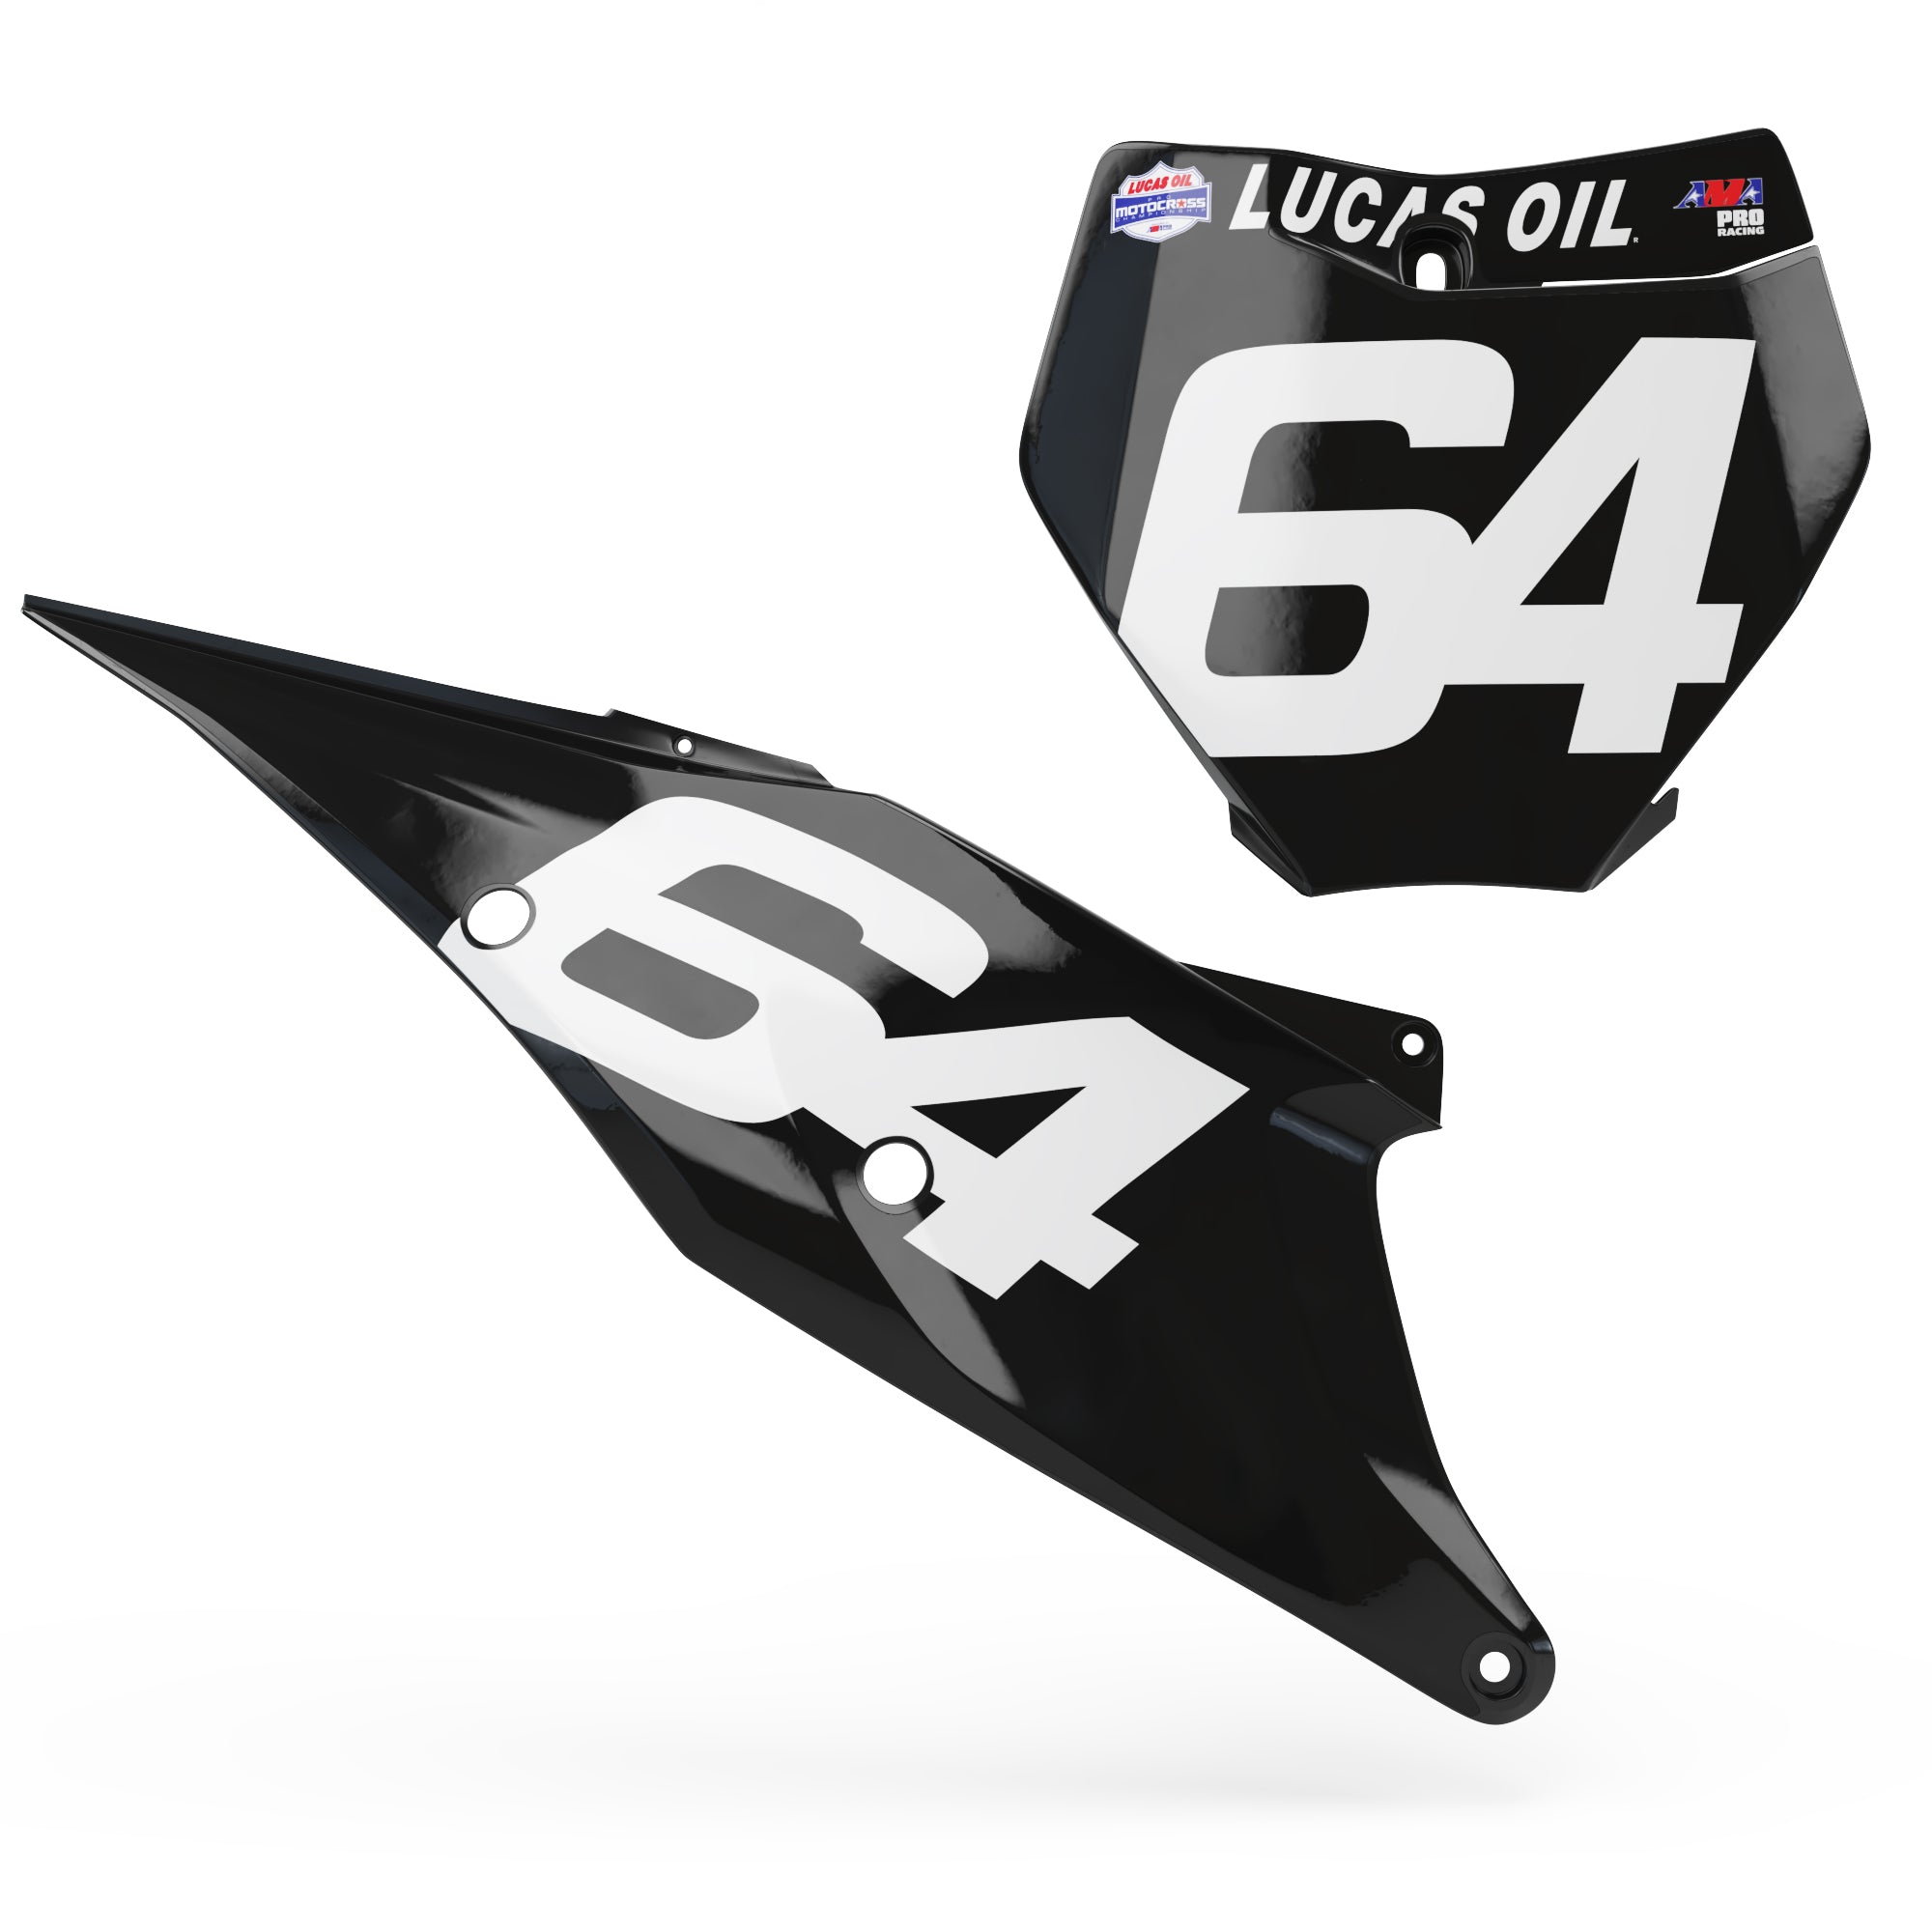 Complete Honda-ENJOY LUCAS OILS Decal Kit with Number Plate Decals